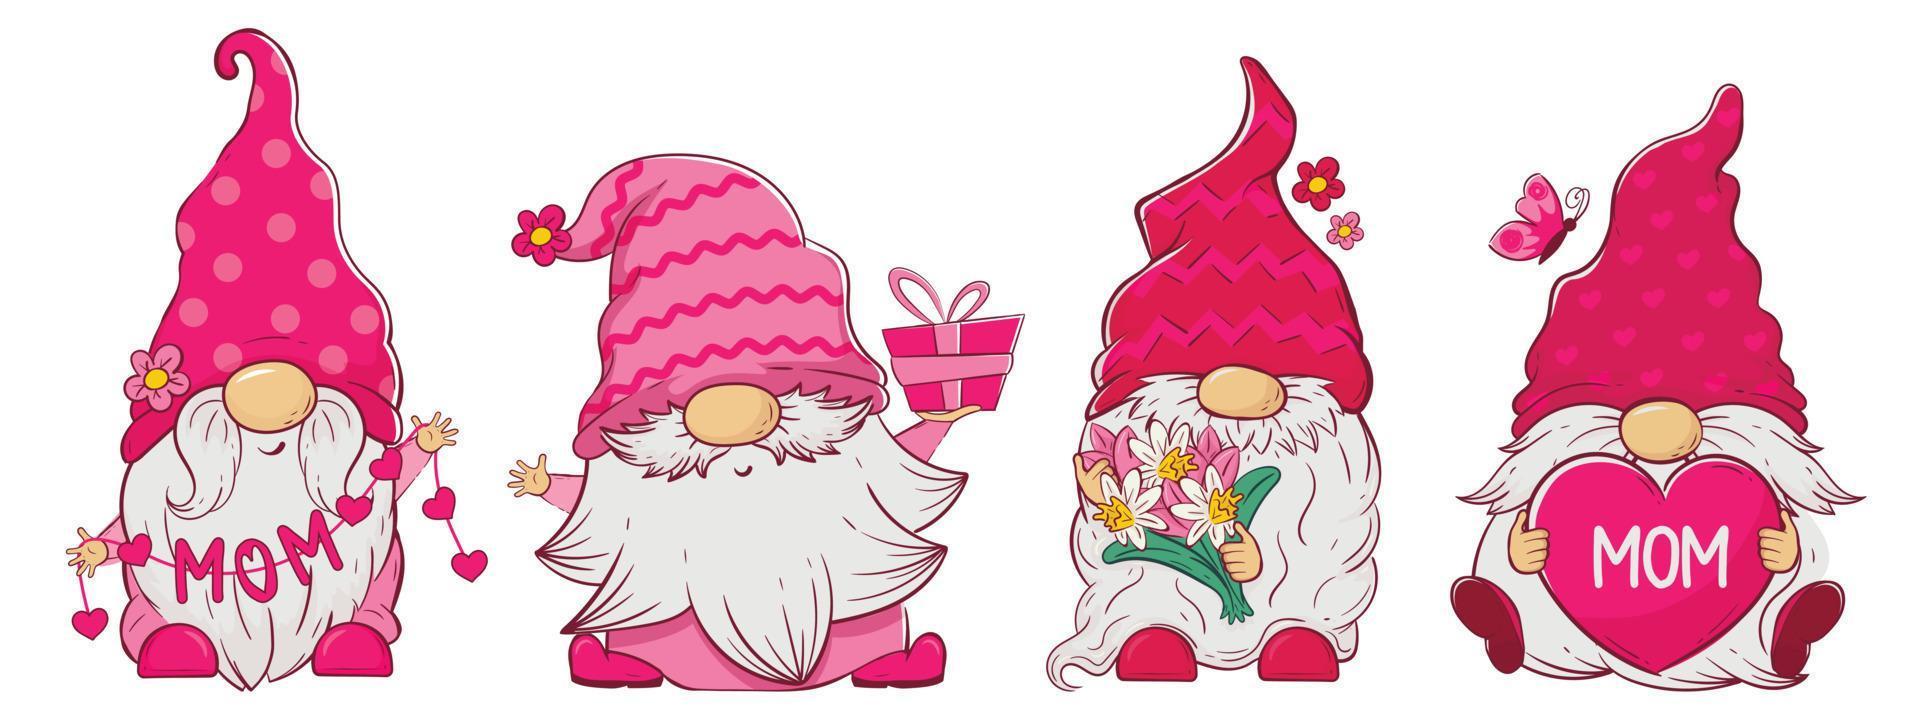 cute cartoon gnomes with gifts and flowers for valentine's day and mother's day vector